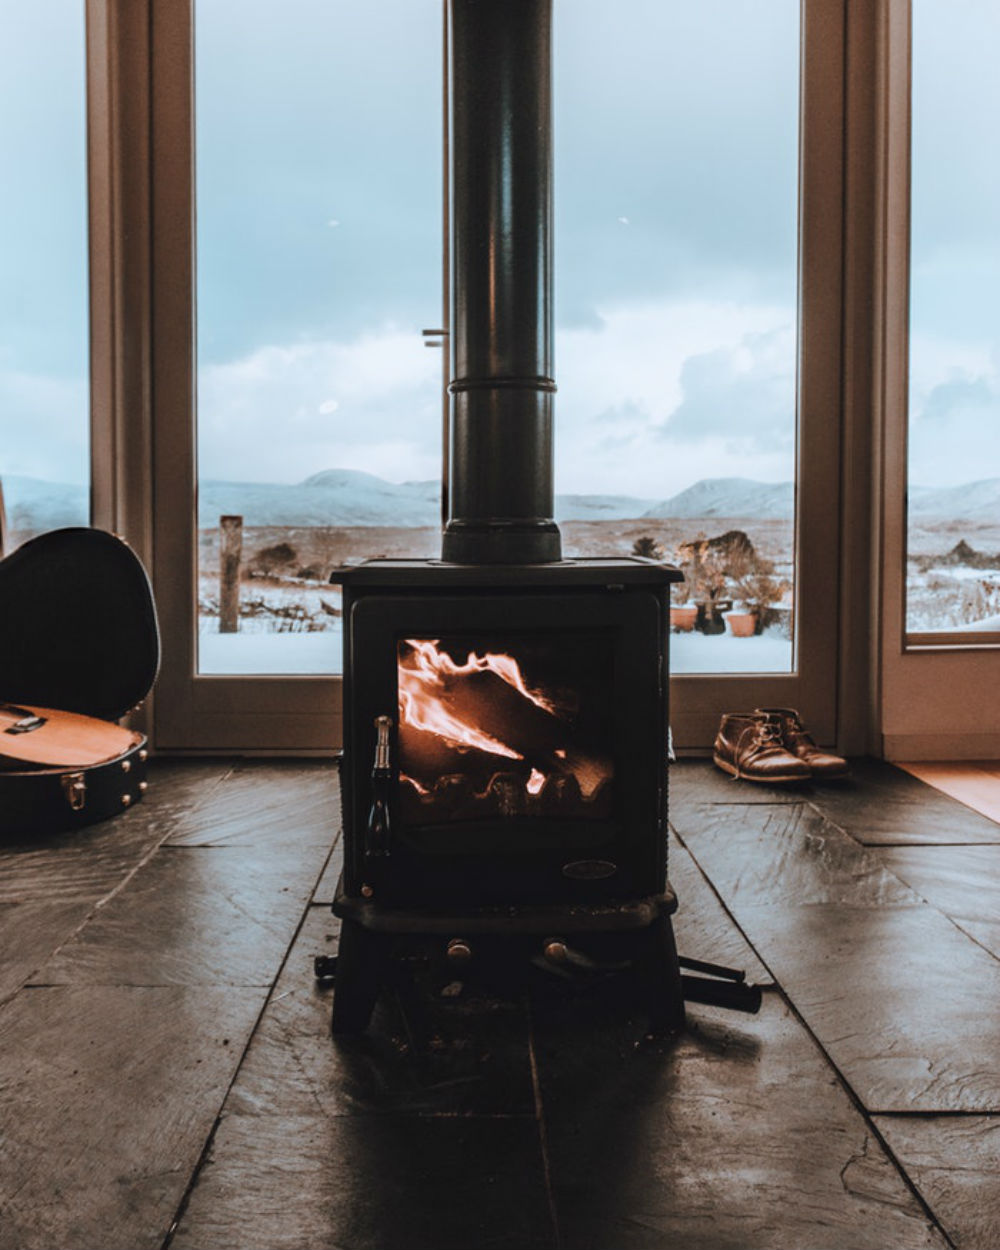 Woodburning stoves for beginners: 4 basic questions to keep the home fires burning